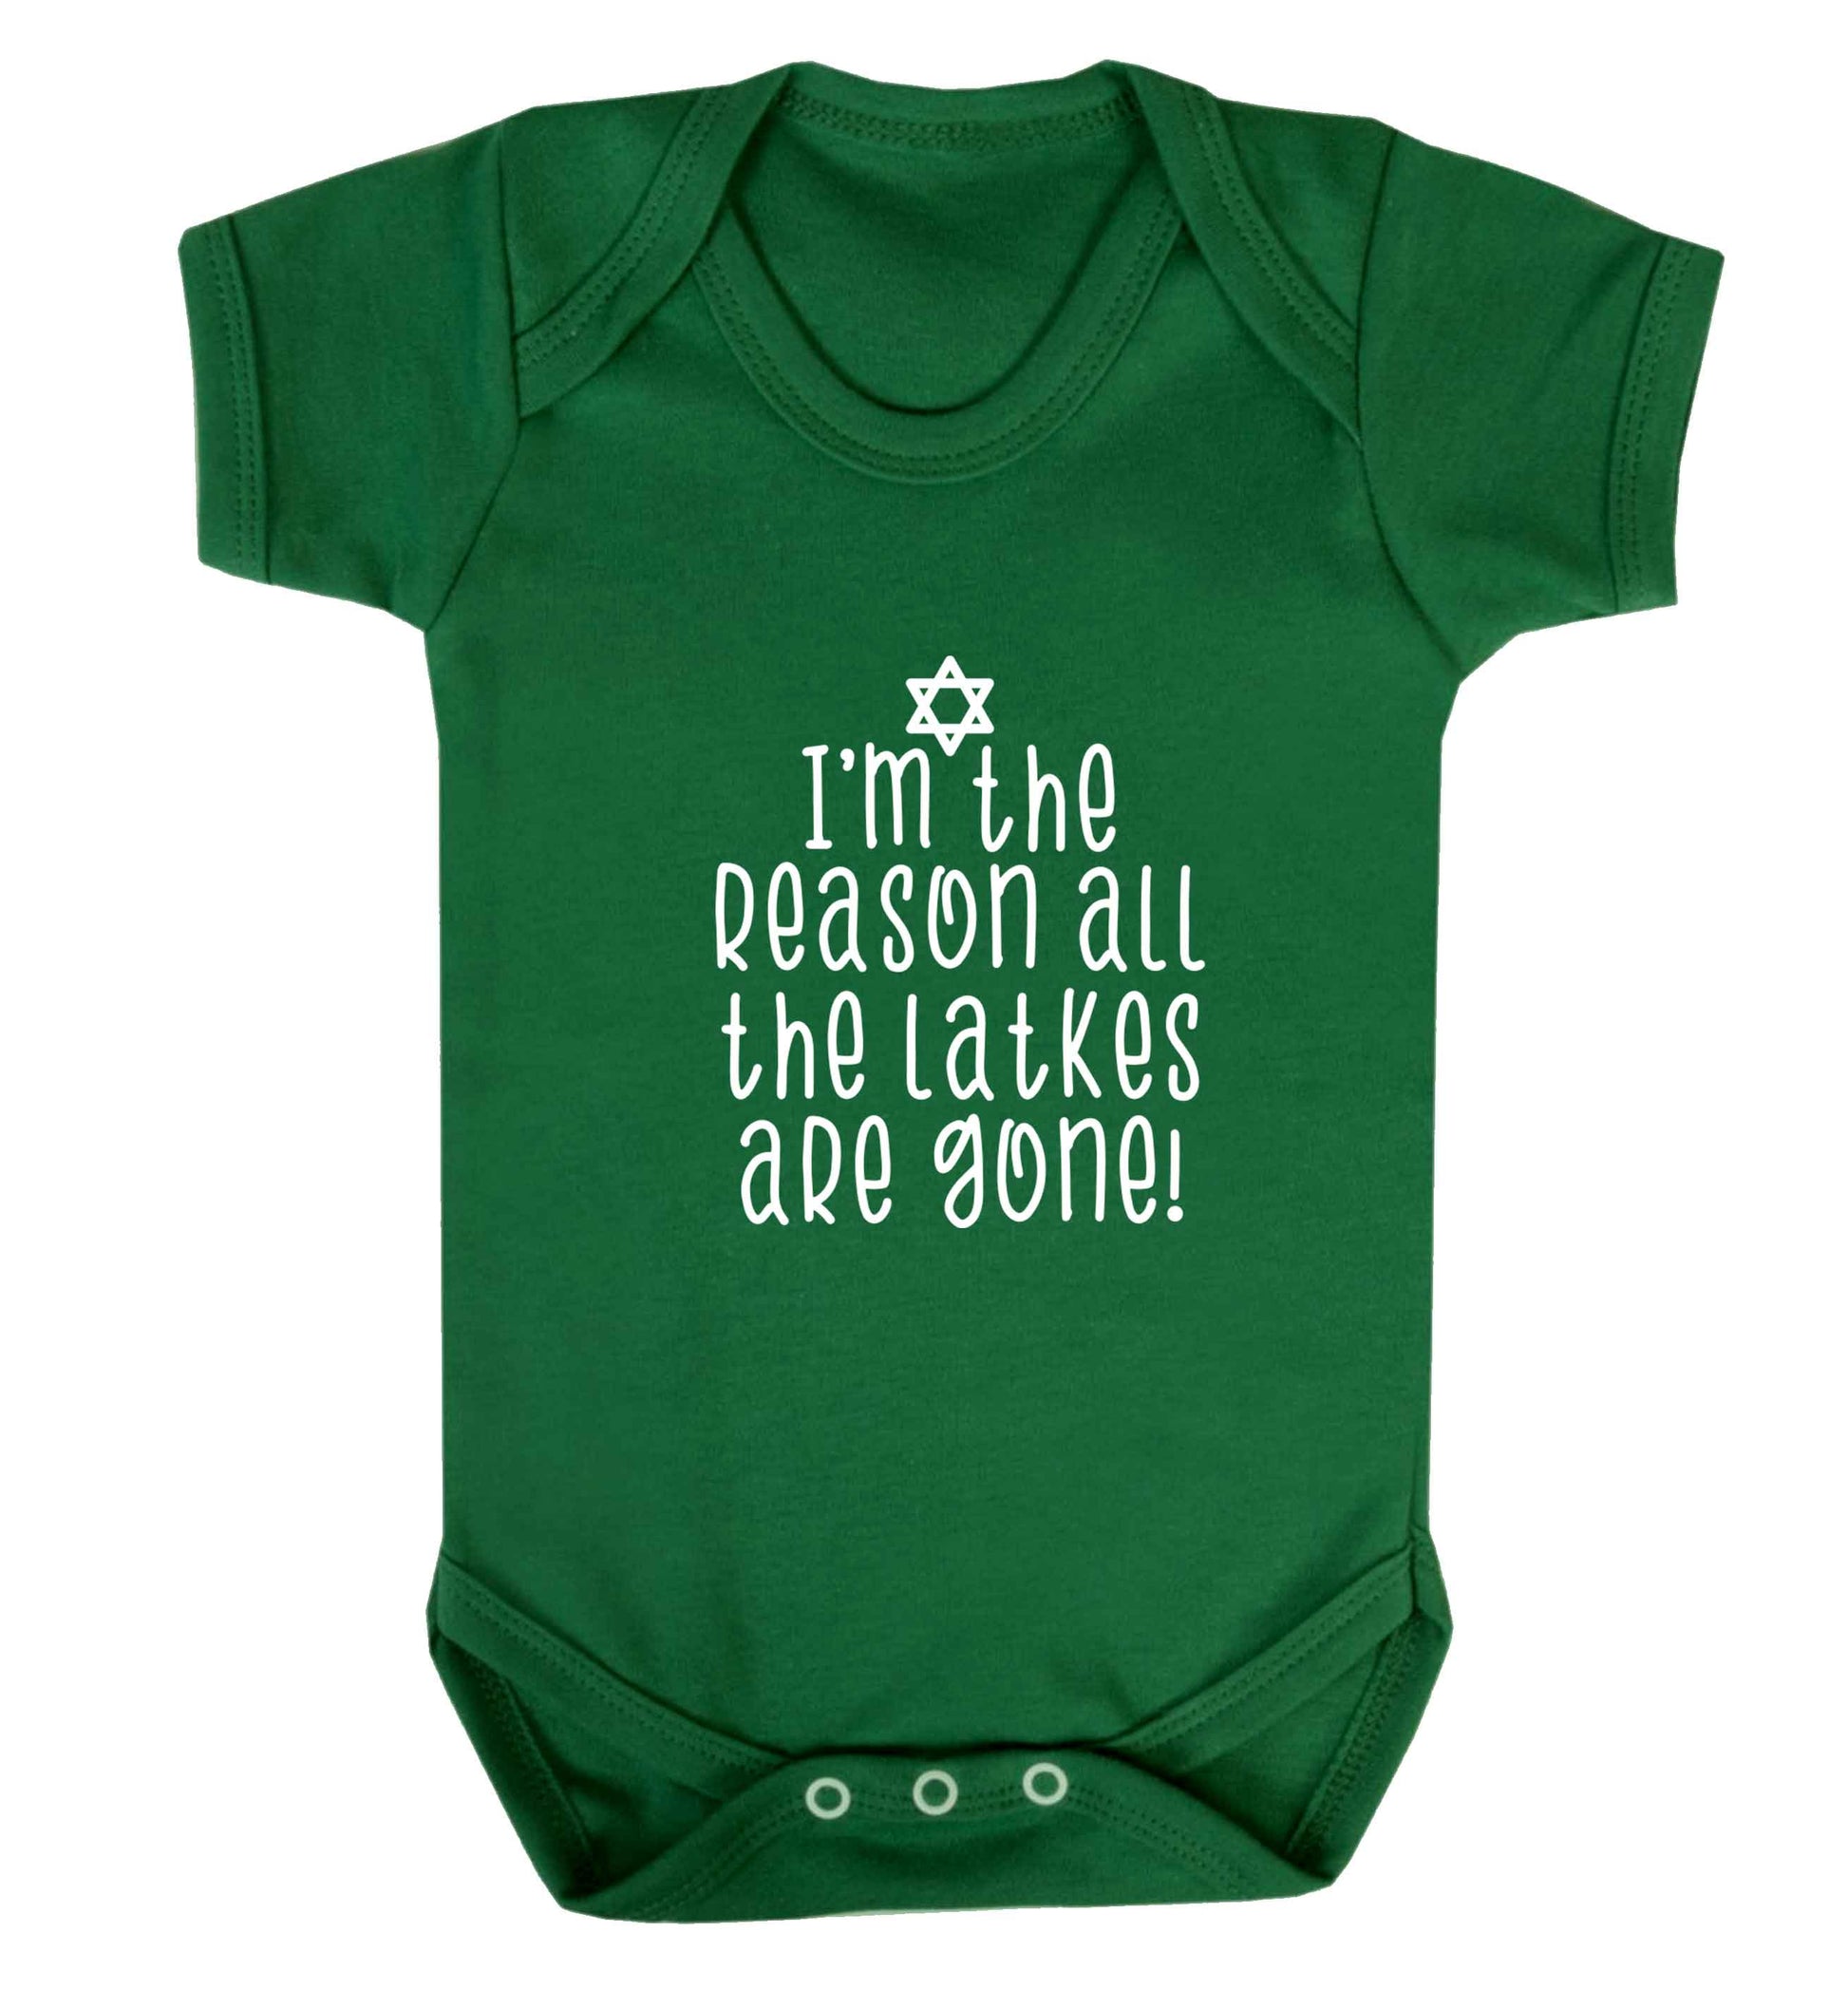 I'm the reason all the latkes are gone baby vest green 18-24 months